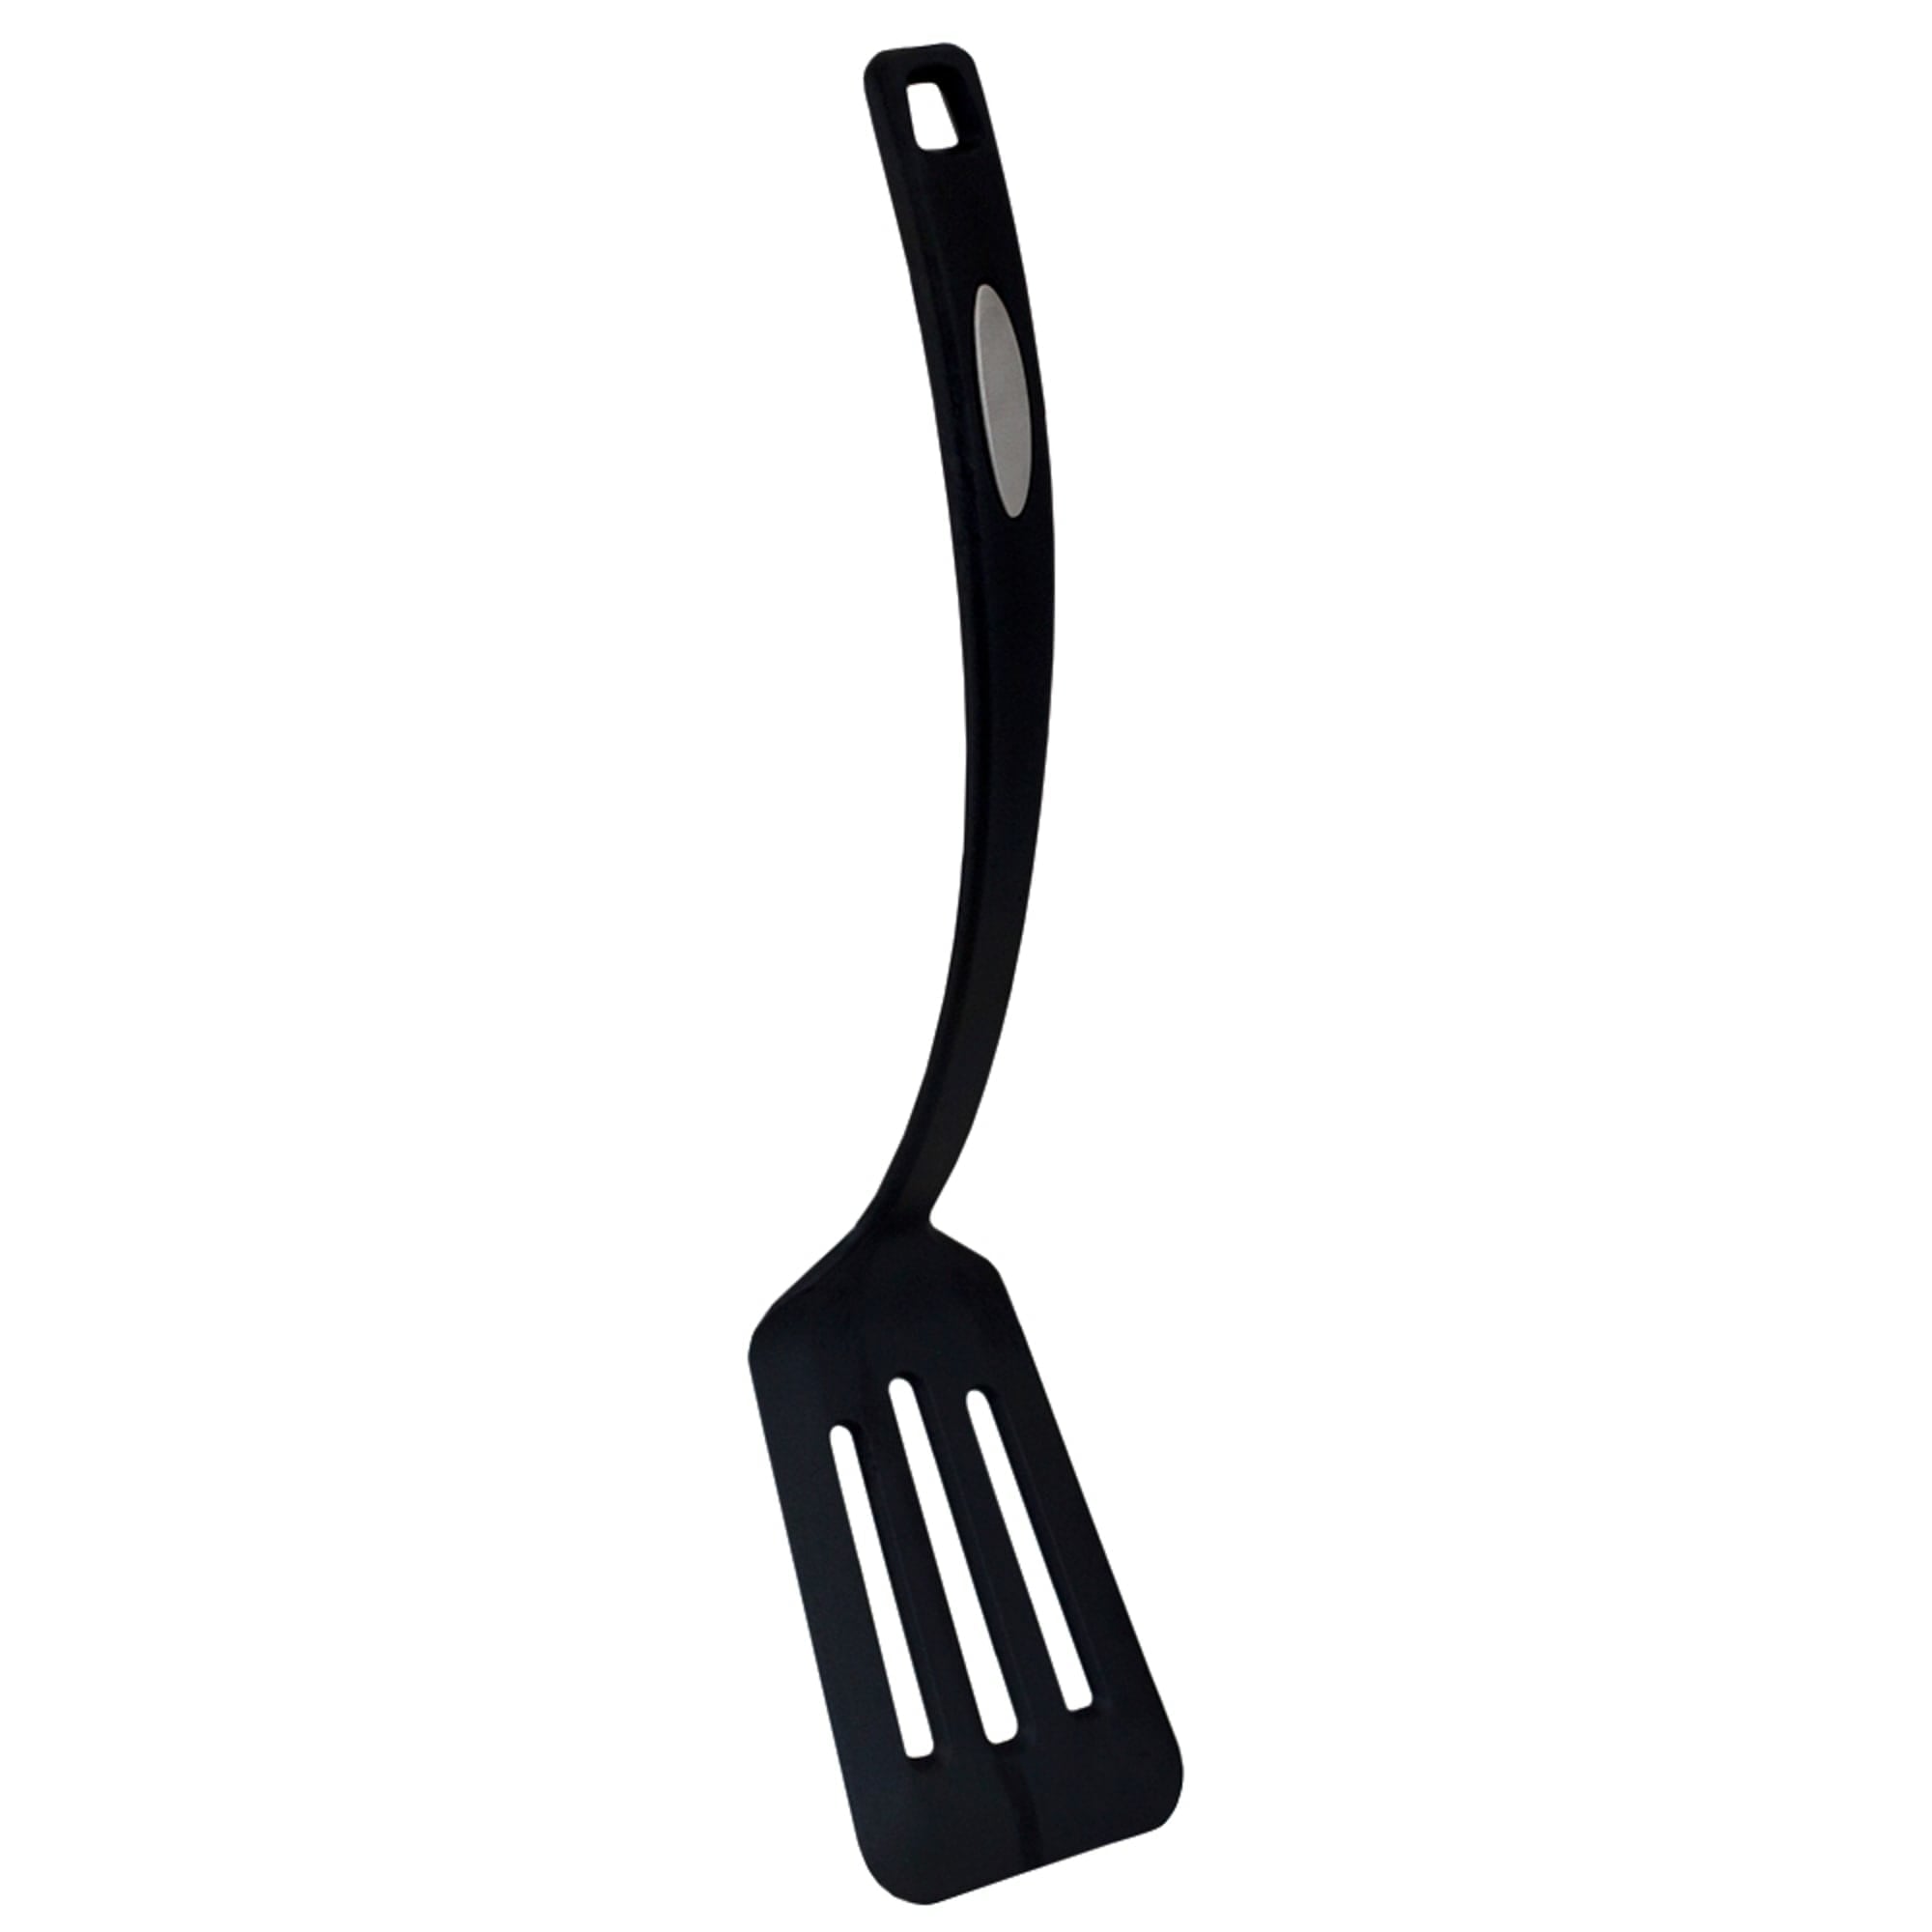 Home Basics Flexible Nylon Non-Stick Slotted Spatula with Curved Handle, Black $1.00 EACH, CASE PACK OF 24